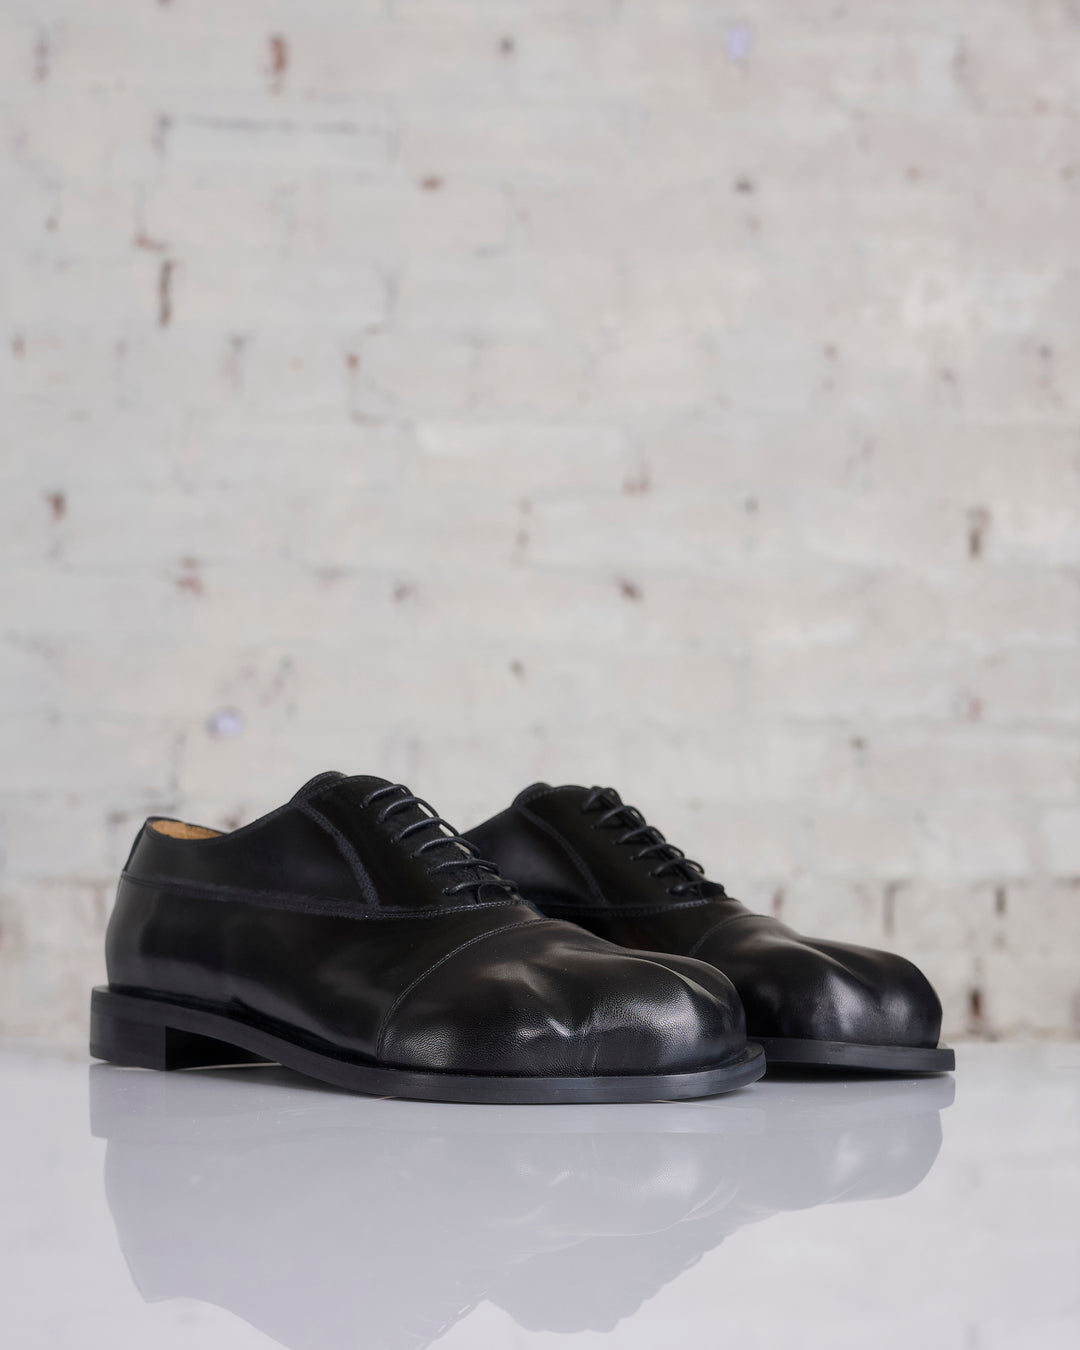 JW Anderson Paw Lace-Up Leather Black